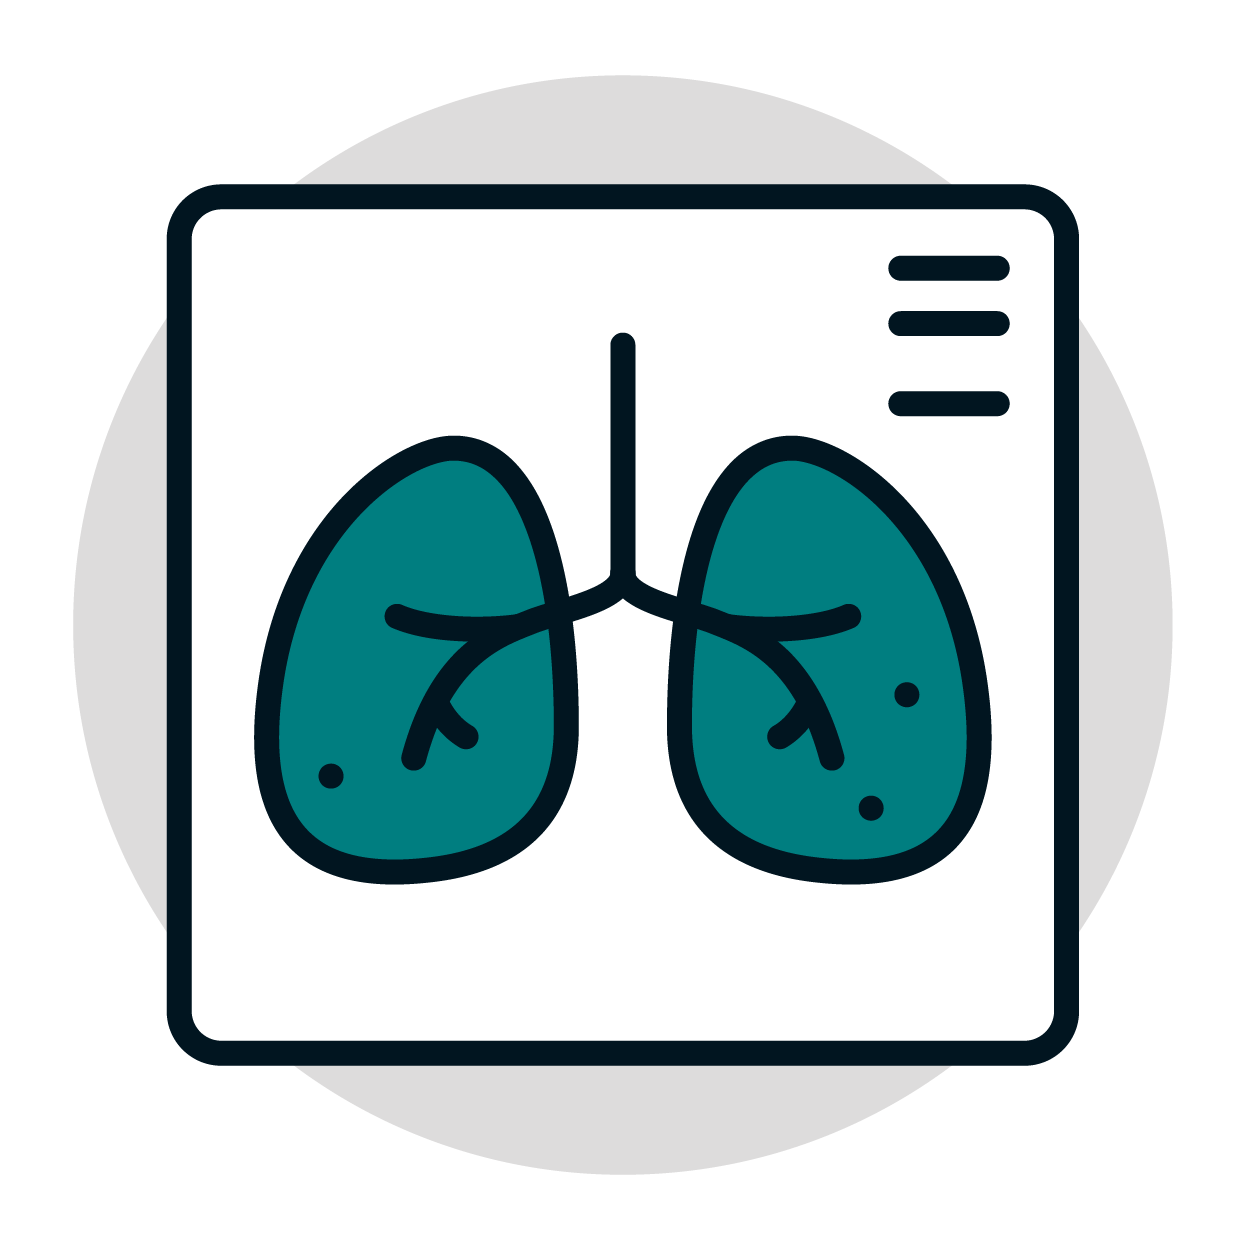 Lung scan icon